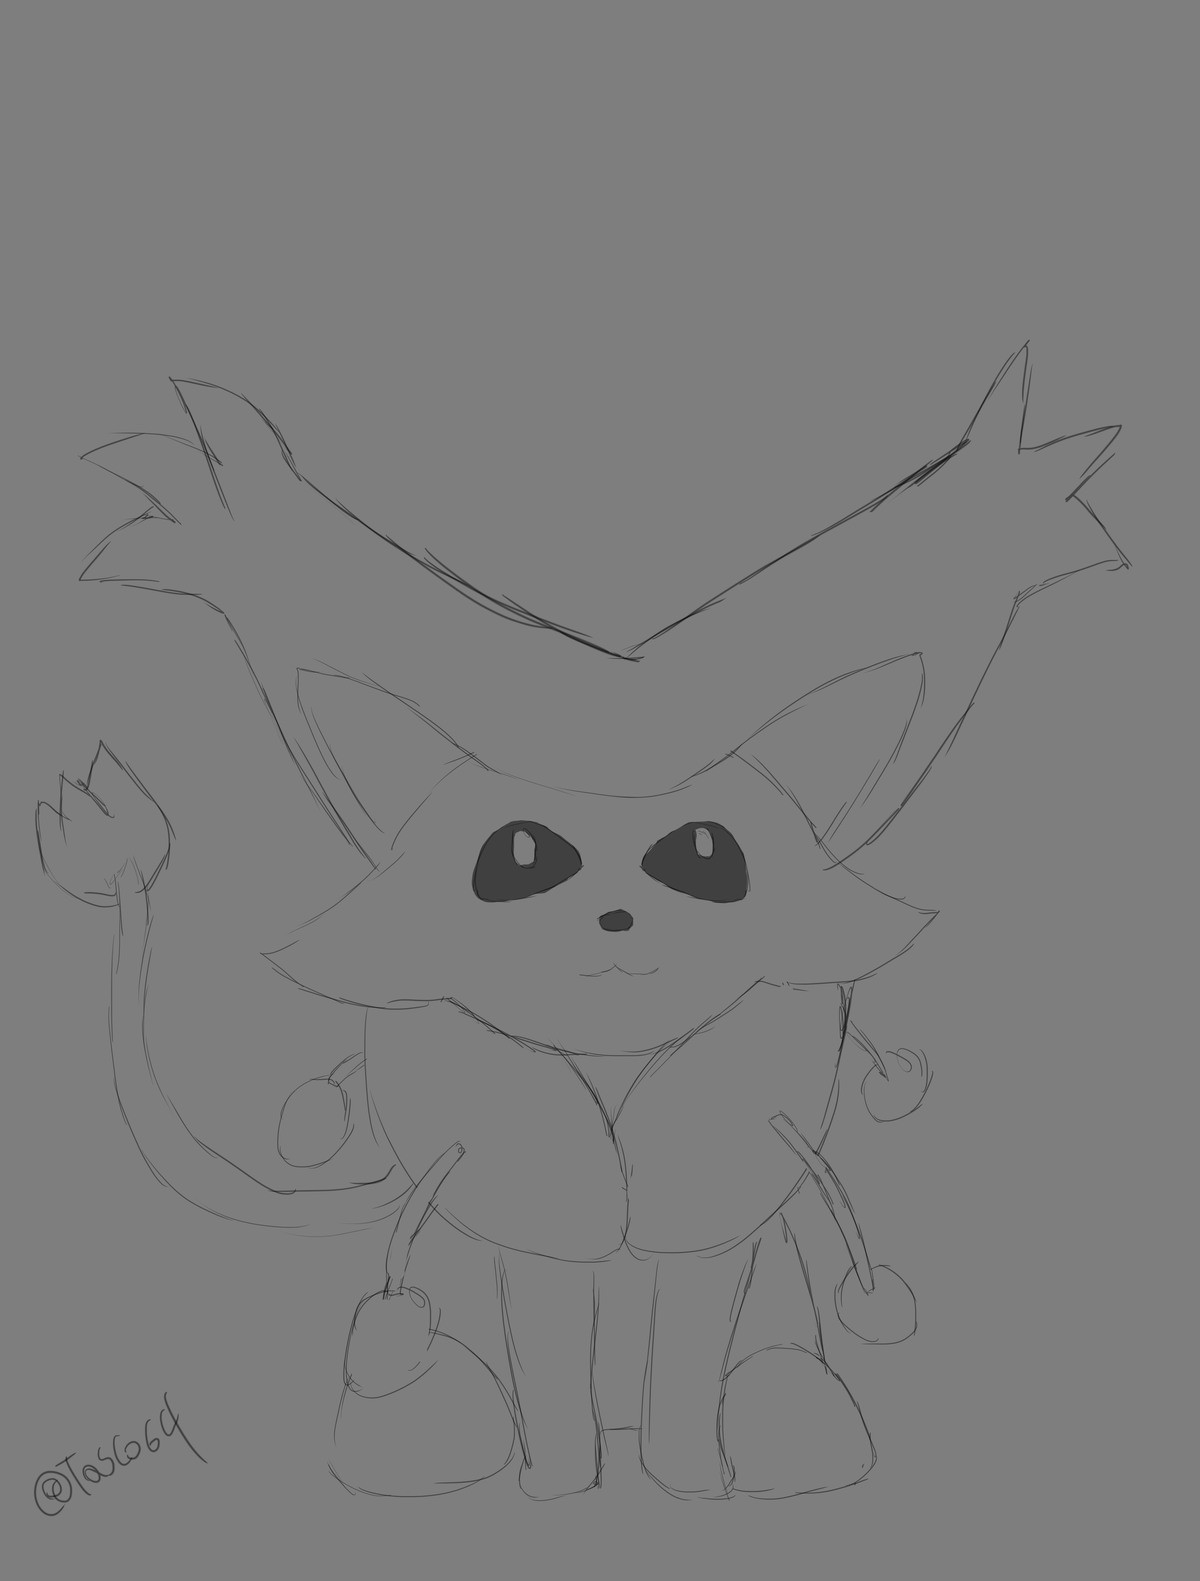 DailyDrawing day 243. delcatty. im definitly suffering from some burn out tonight. so heres a delcatty. im sorry join list: SupernerdART (100 subs)Mention Histo